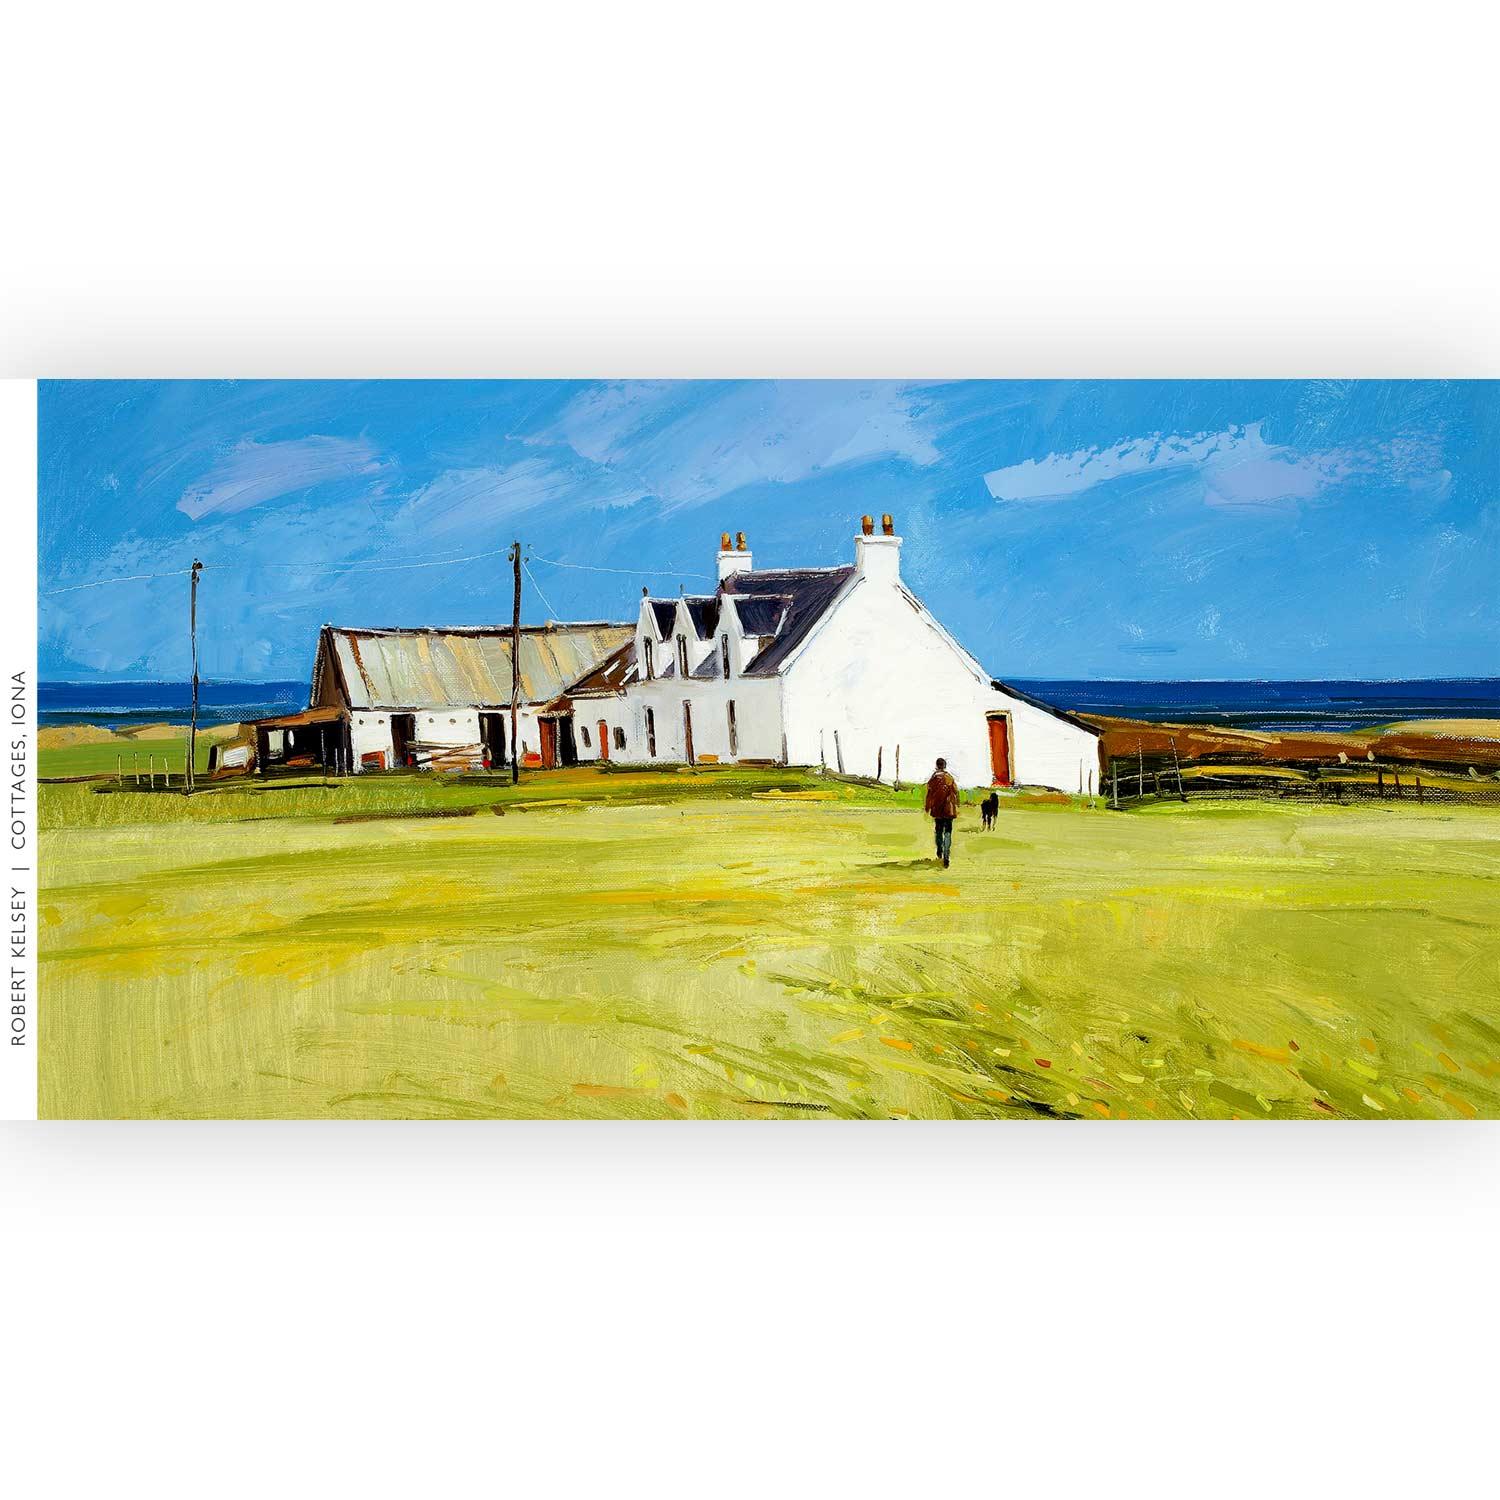 Cottages Iona by artist Robert Kelsey